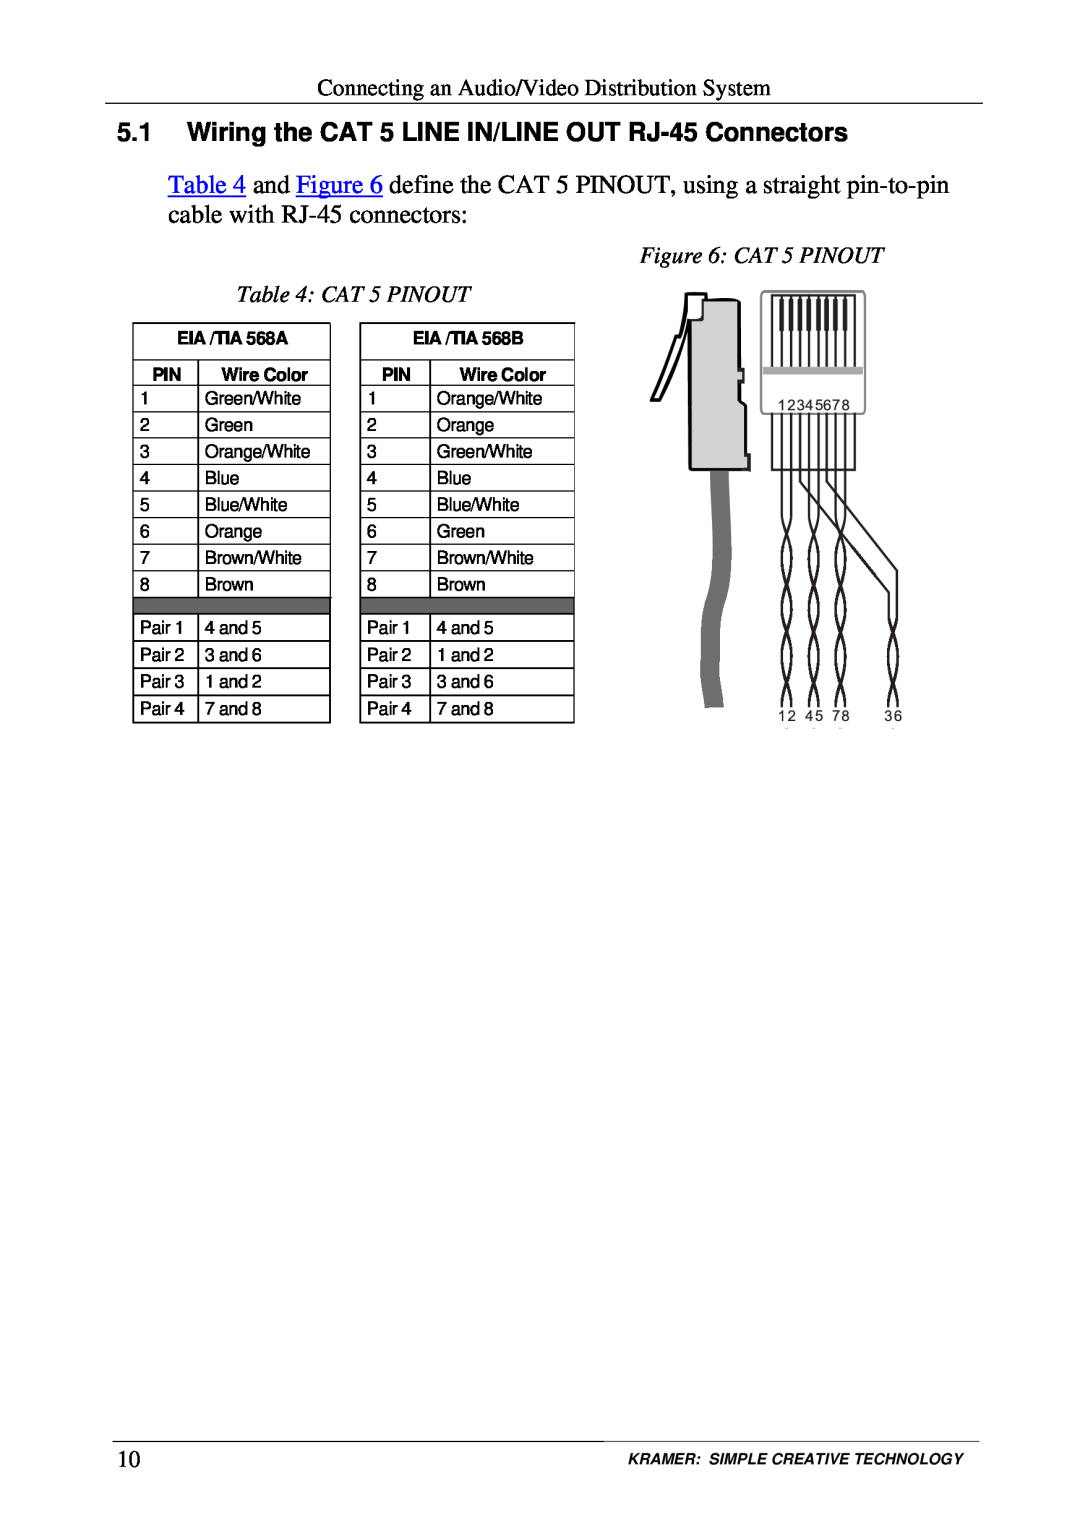 Kramer Electronics TP-9 Wiring the CAT 5 LINE IN/LINE OUT RJ-45 Connectors, CAT 5 PINOUT CAT 5 PINOUT, EIA /TIA 568A 